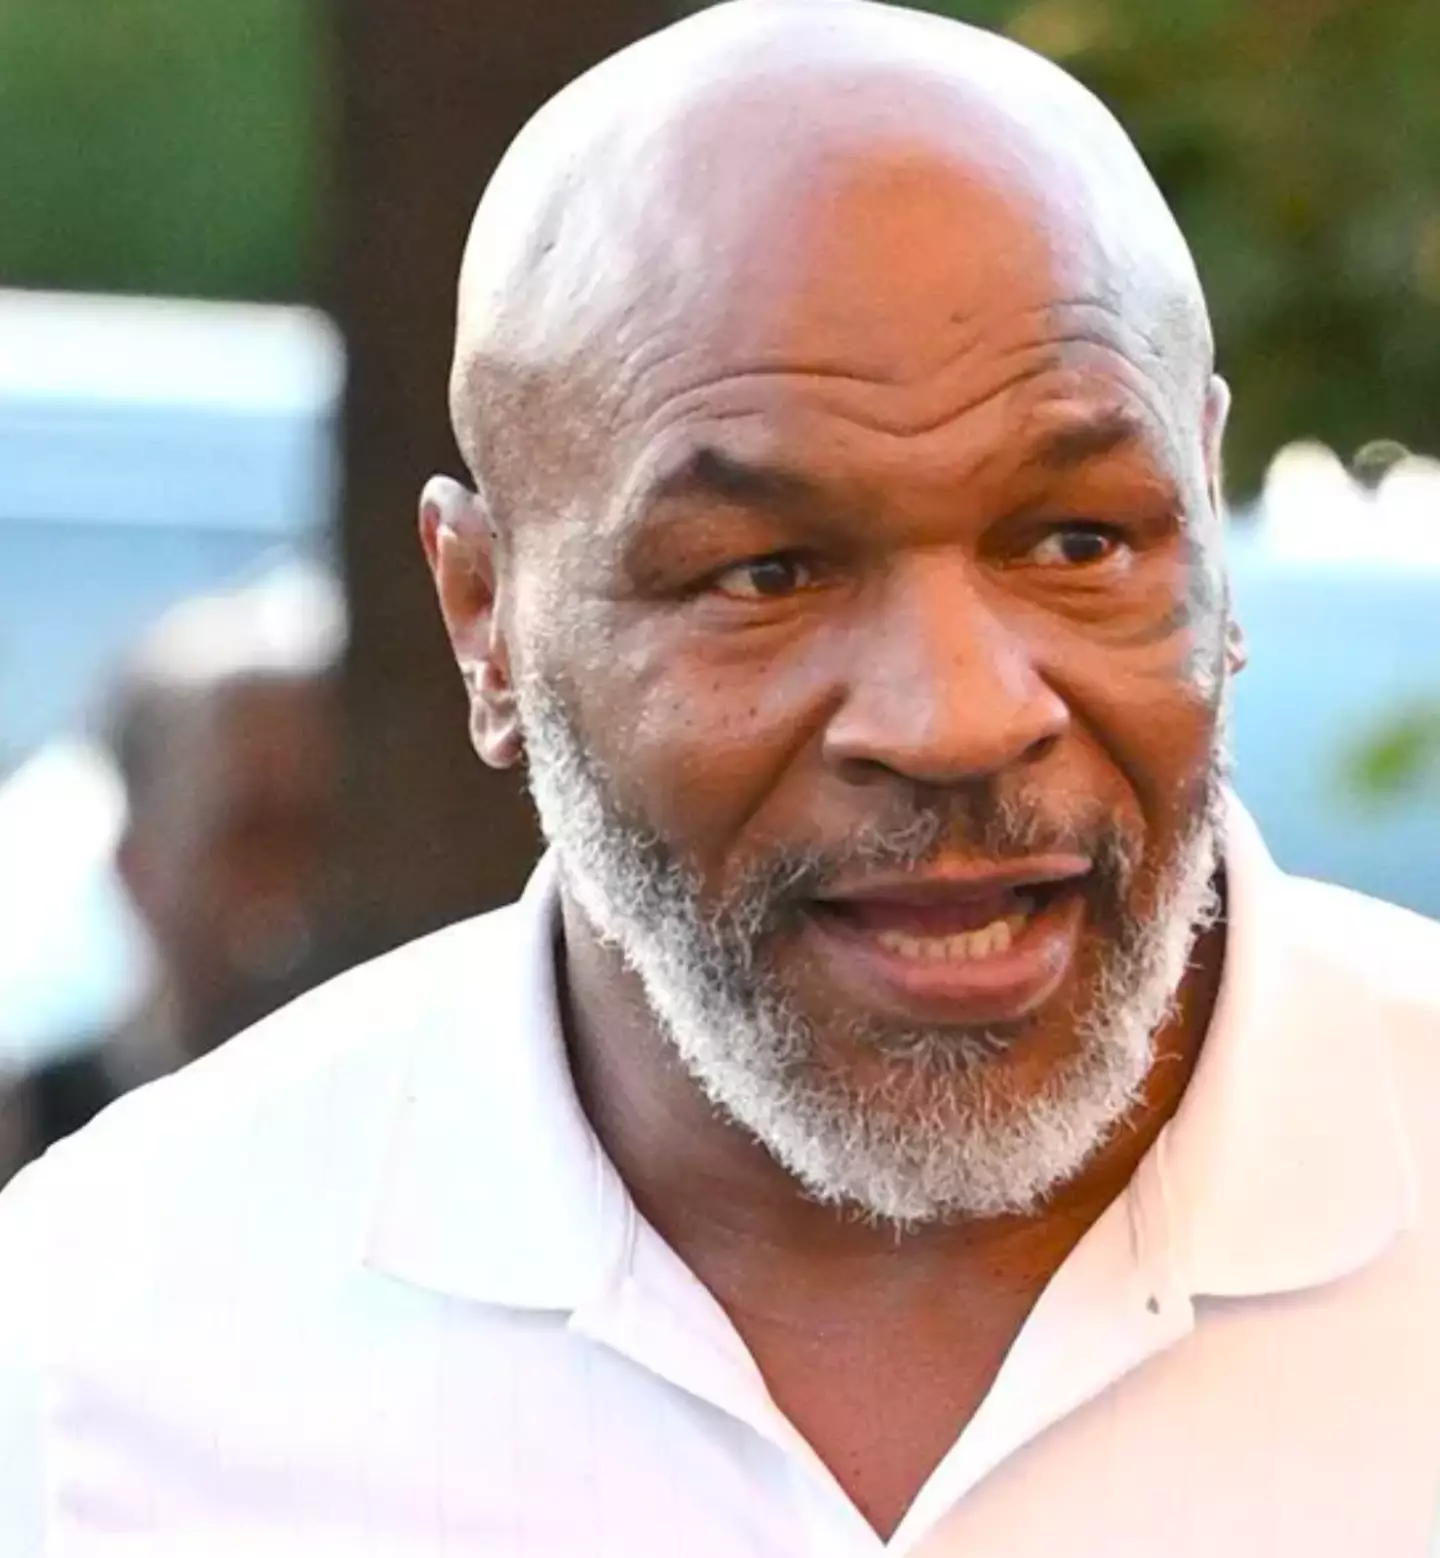 Mike Tyson wants NBA players to come to him for weed.